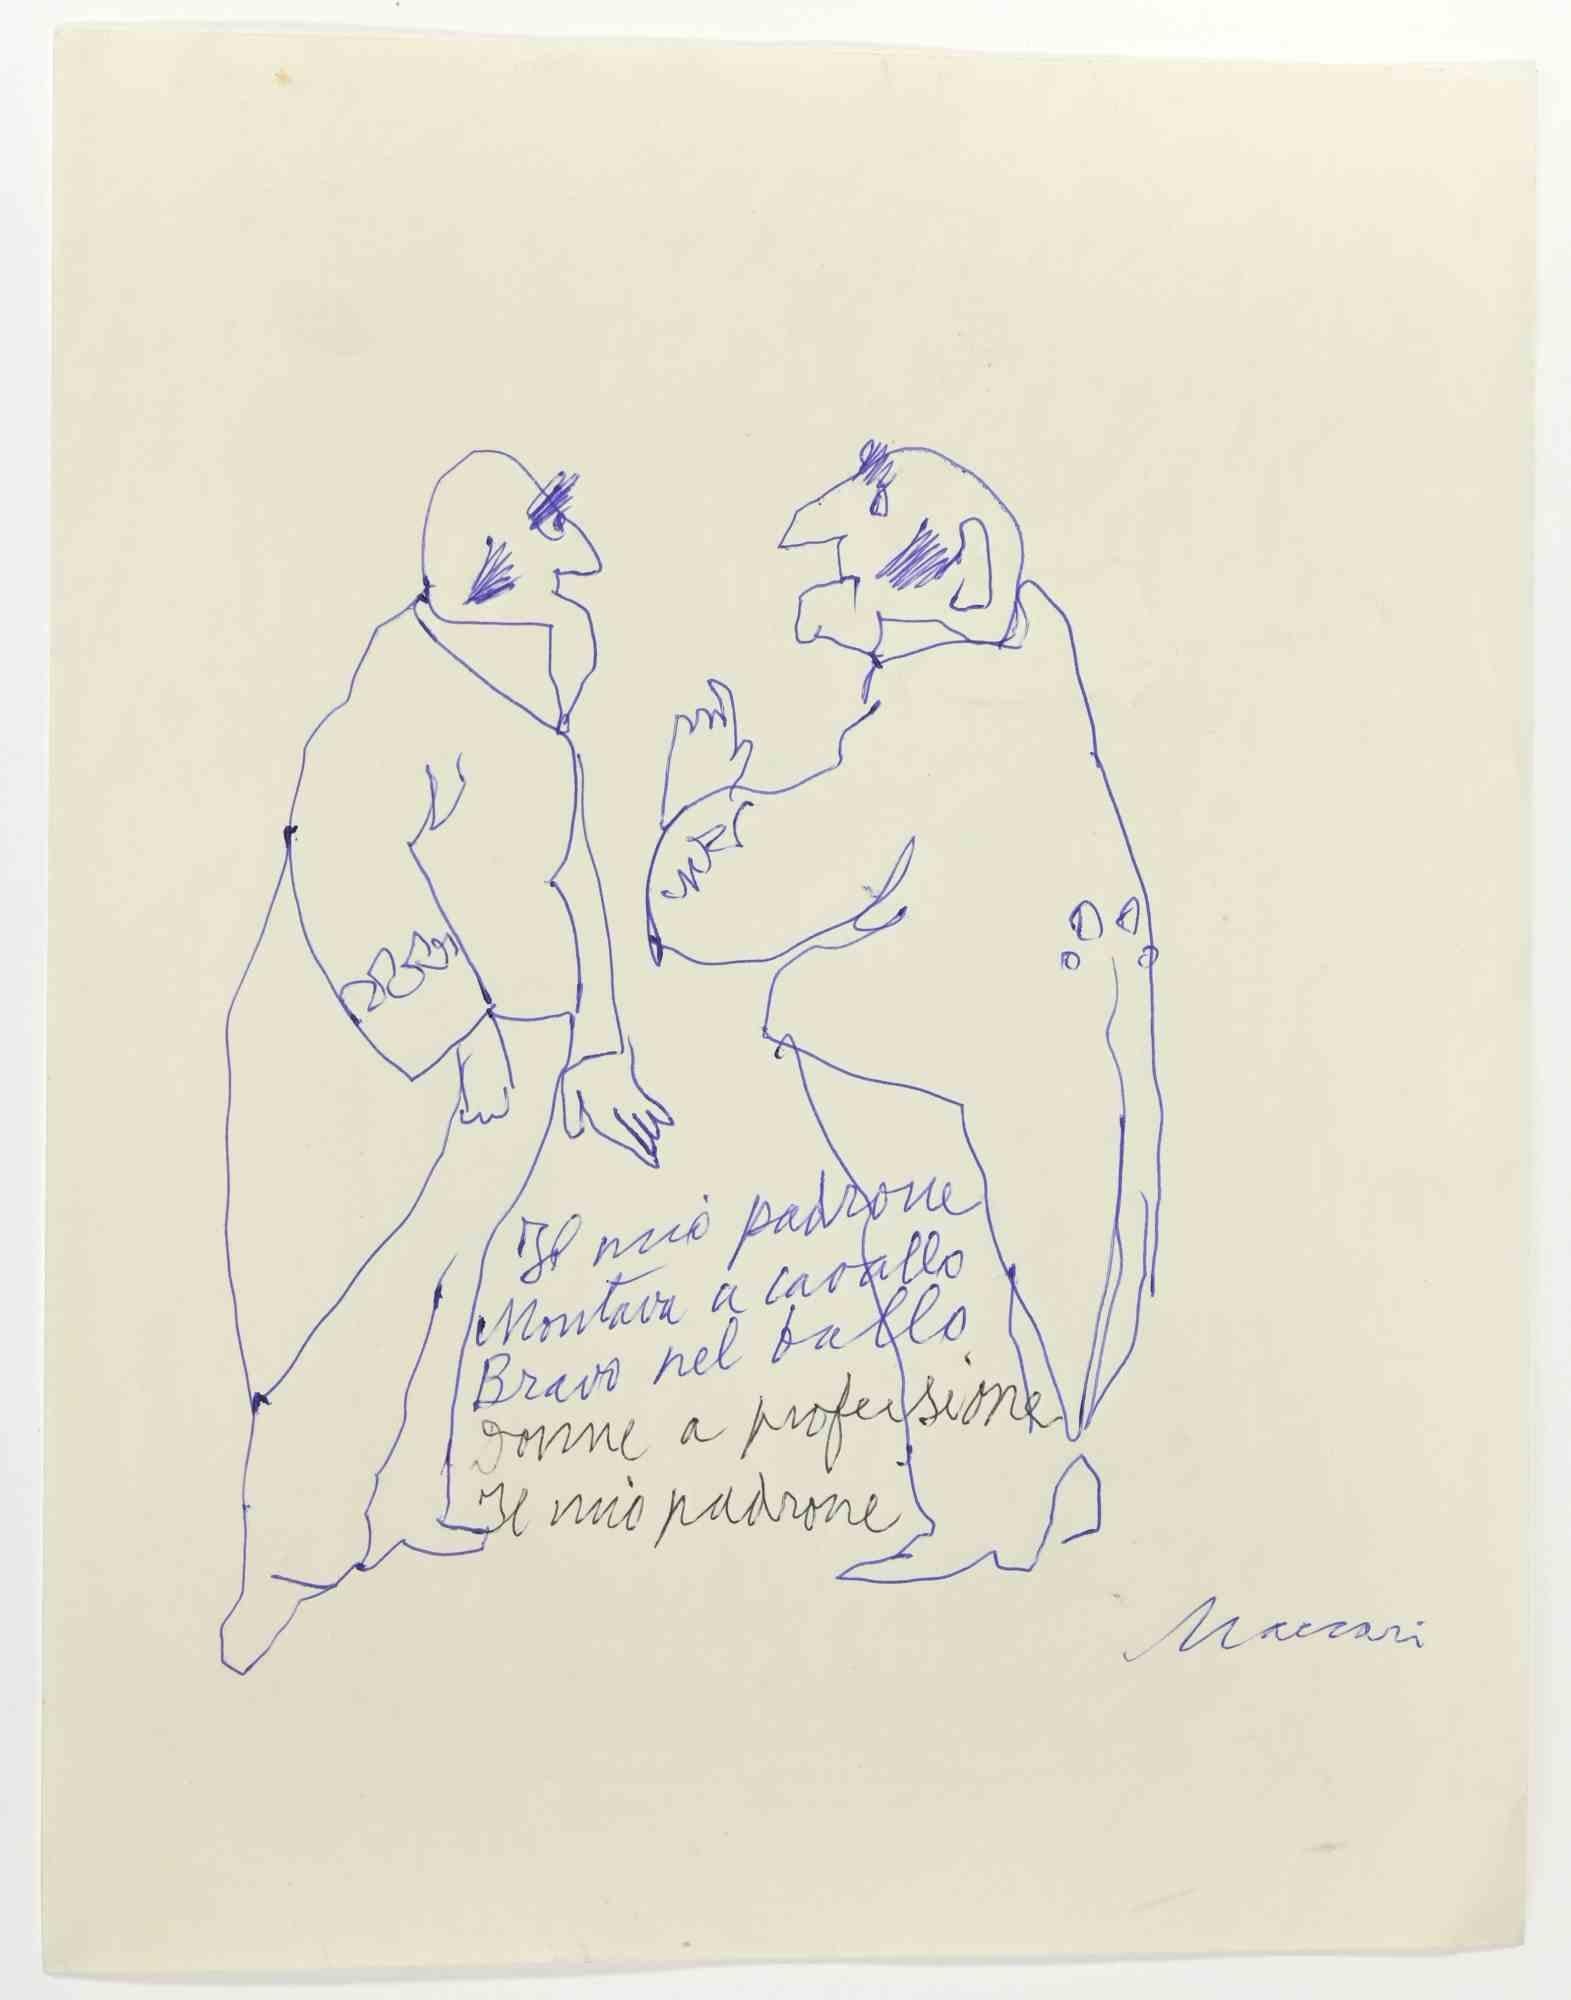 Godfather is a Pen Drawing realized by Mino Maccari  (1924-1989) in the 1960s.

Hand-signed on the lower.

Good condition.

Mino Maccari (Siena, 1924-Rome, June 16, 1989) was an Italian writer, painter, engraver and journalist, winner of the